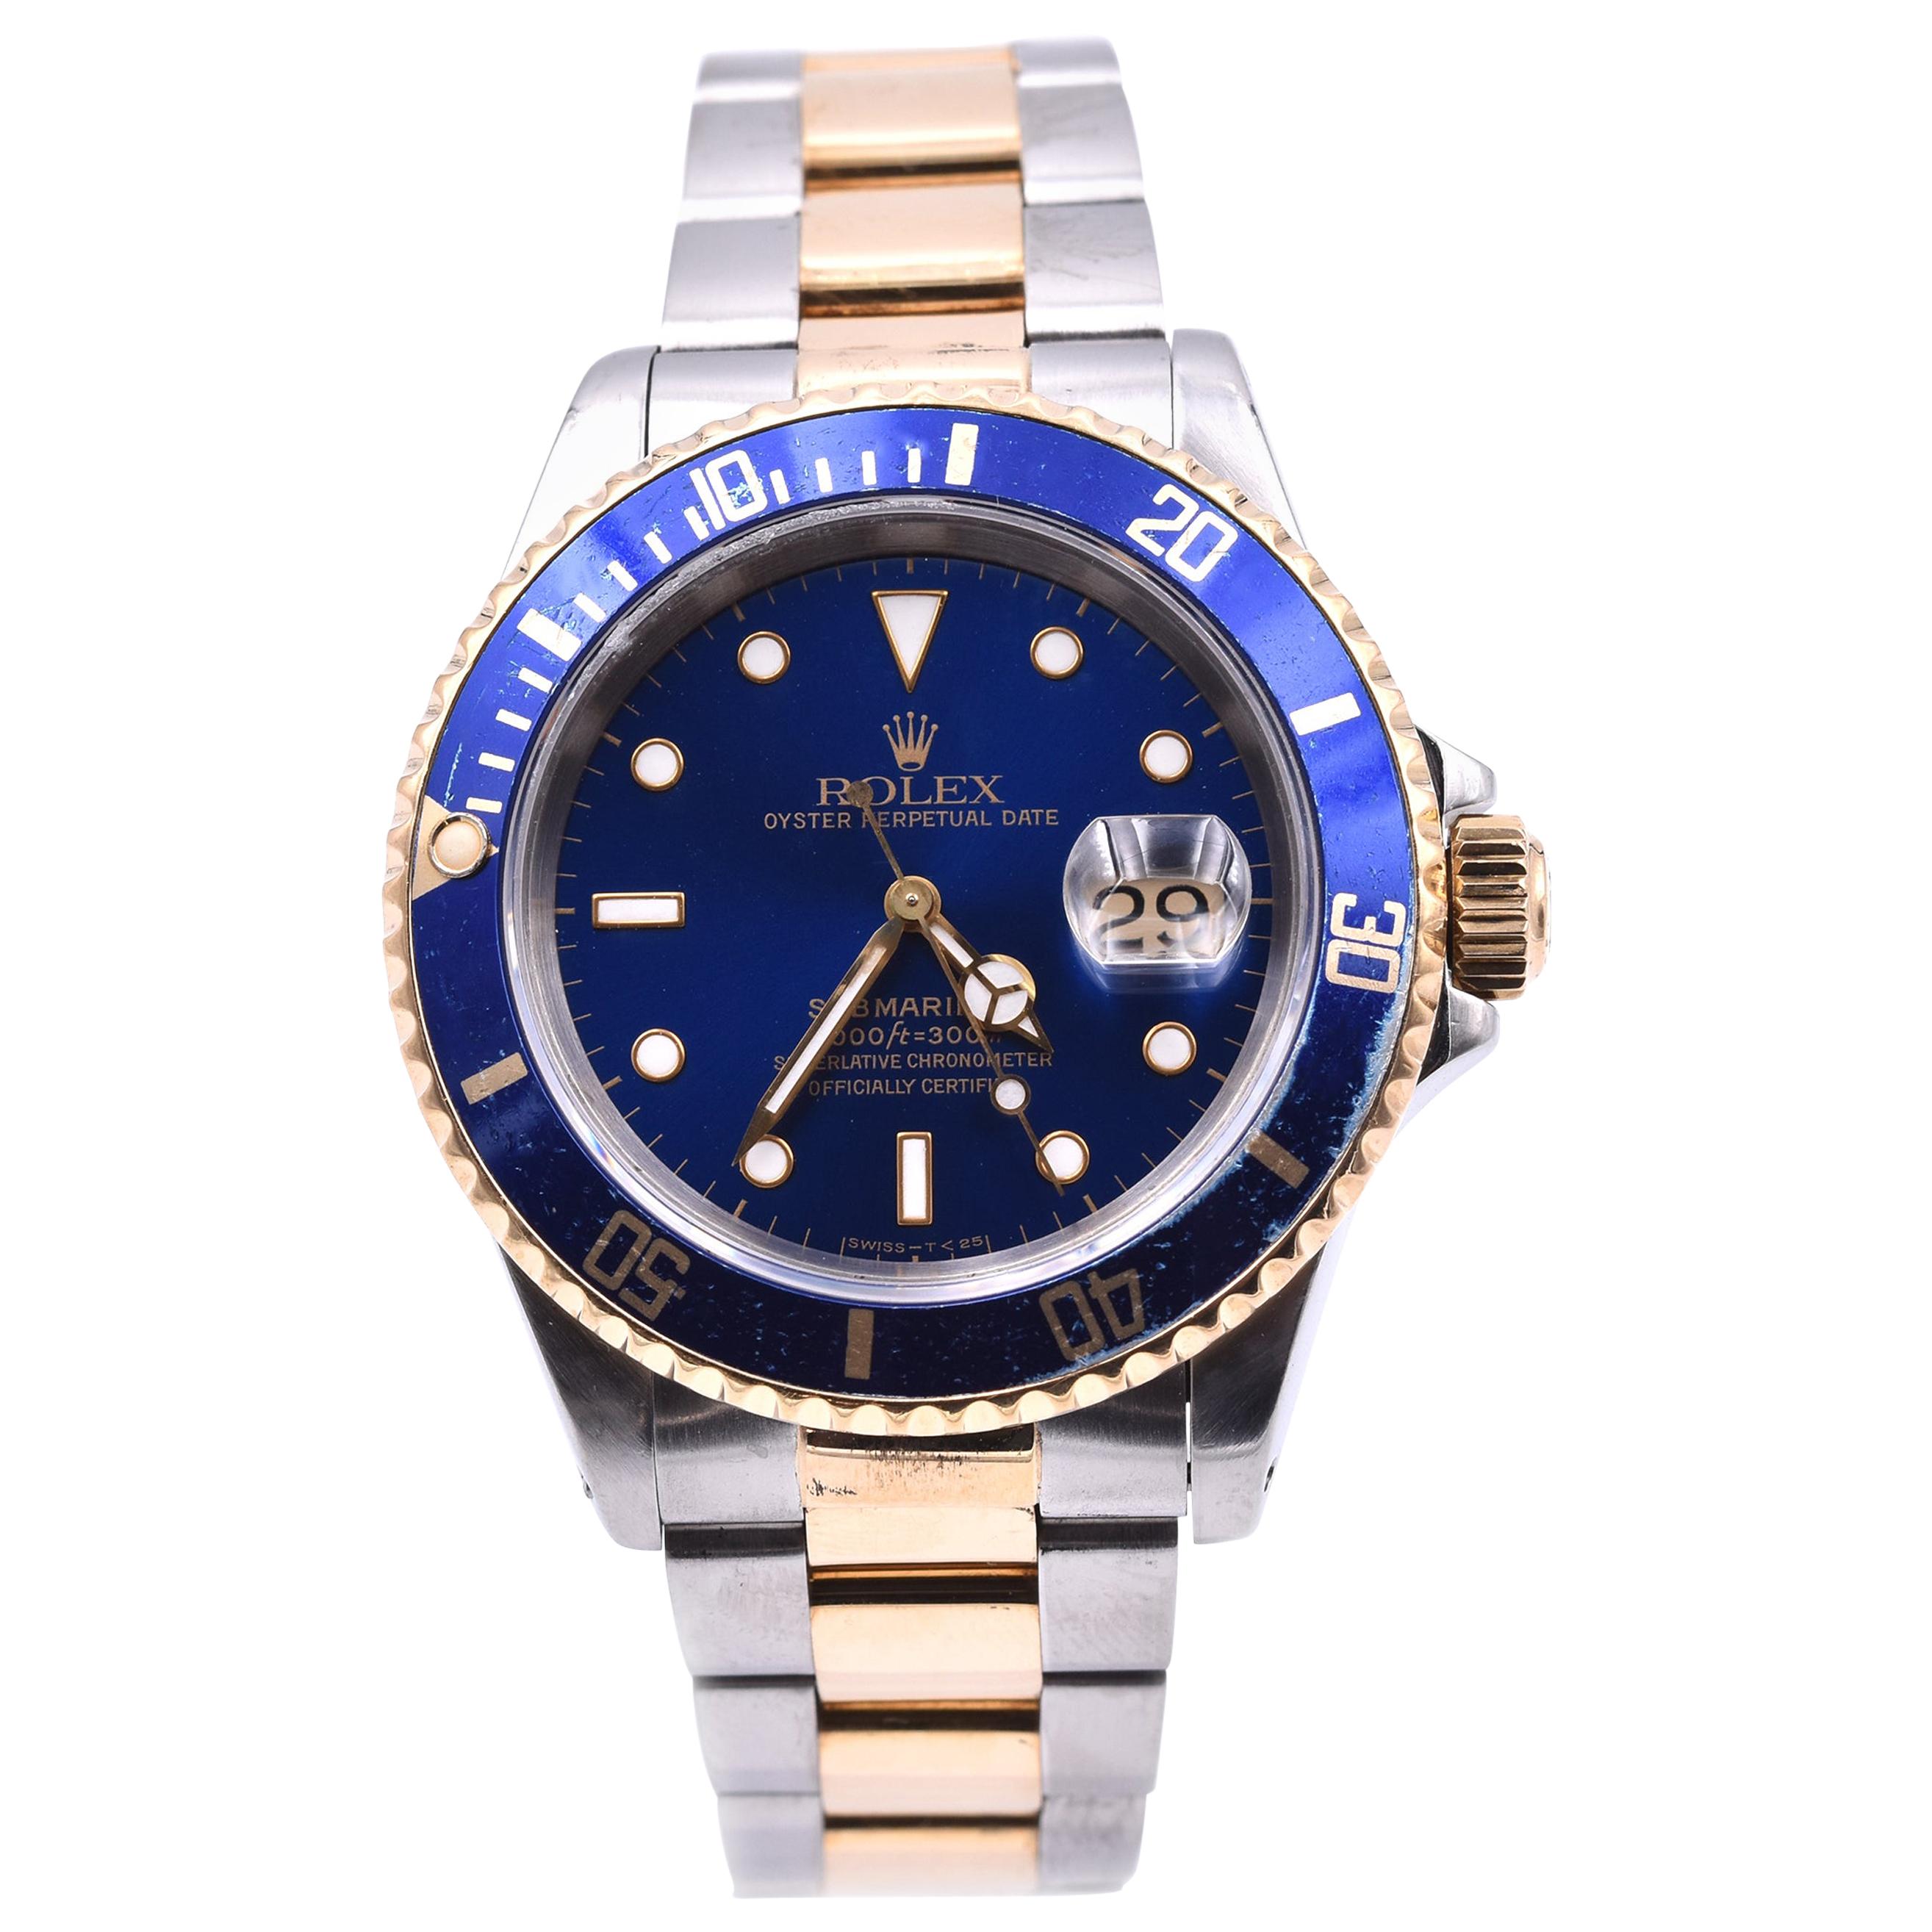 Rolex Two-Tone Submariner with Blue Dial/Bezel Watch Ref. 5947